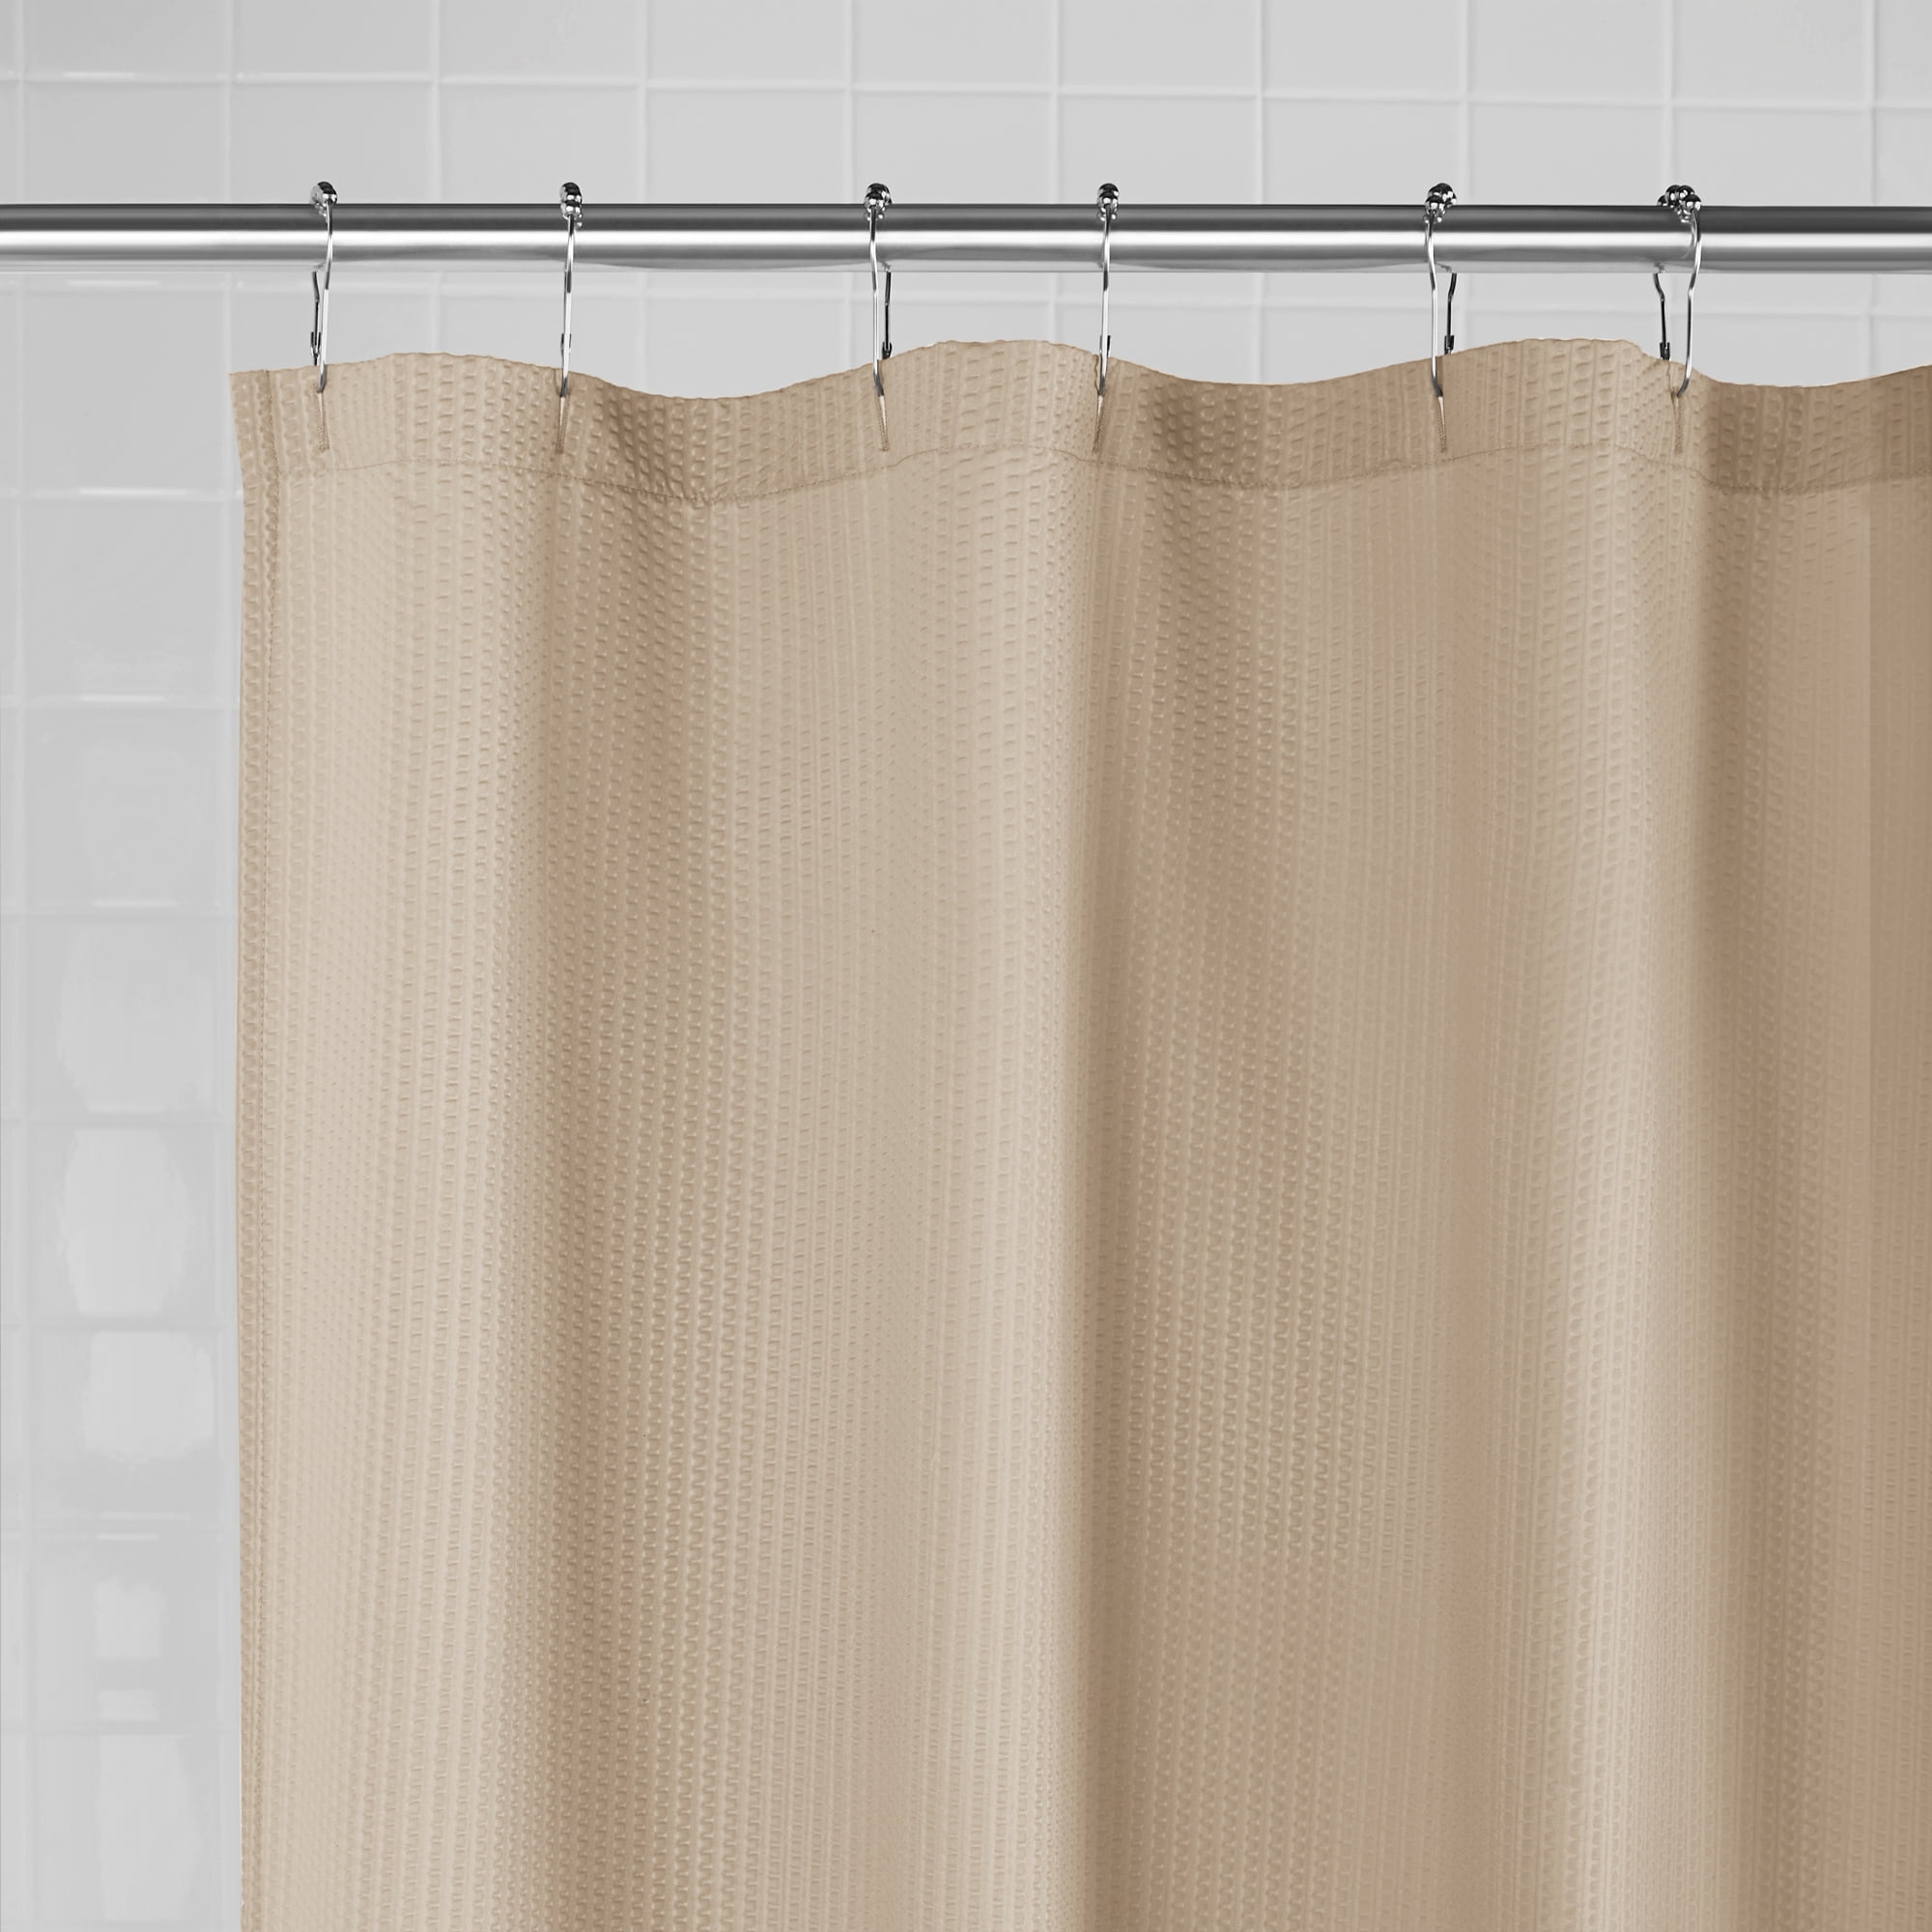 Details about   Microdry 13-Piece Water Repellent Embossed Fabric Shower Curtain Liner Set Inc 